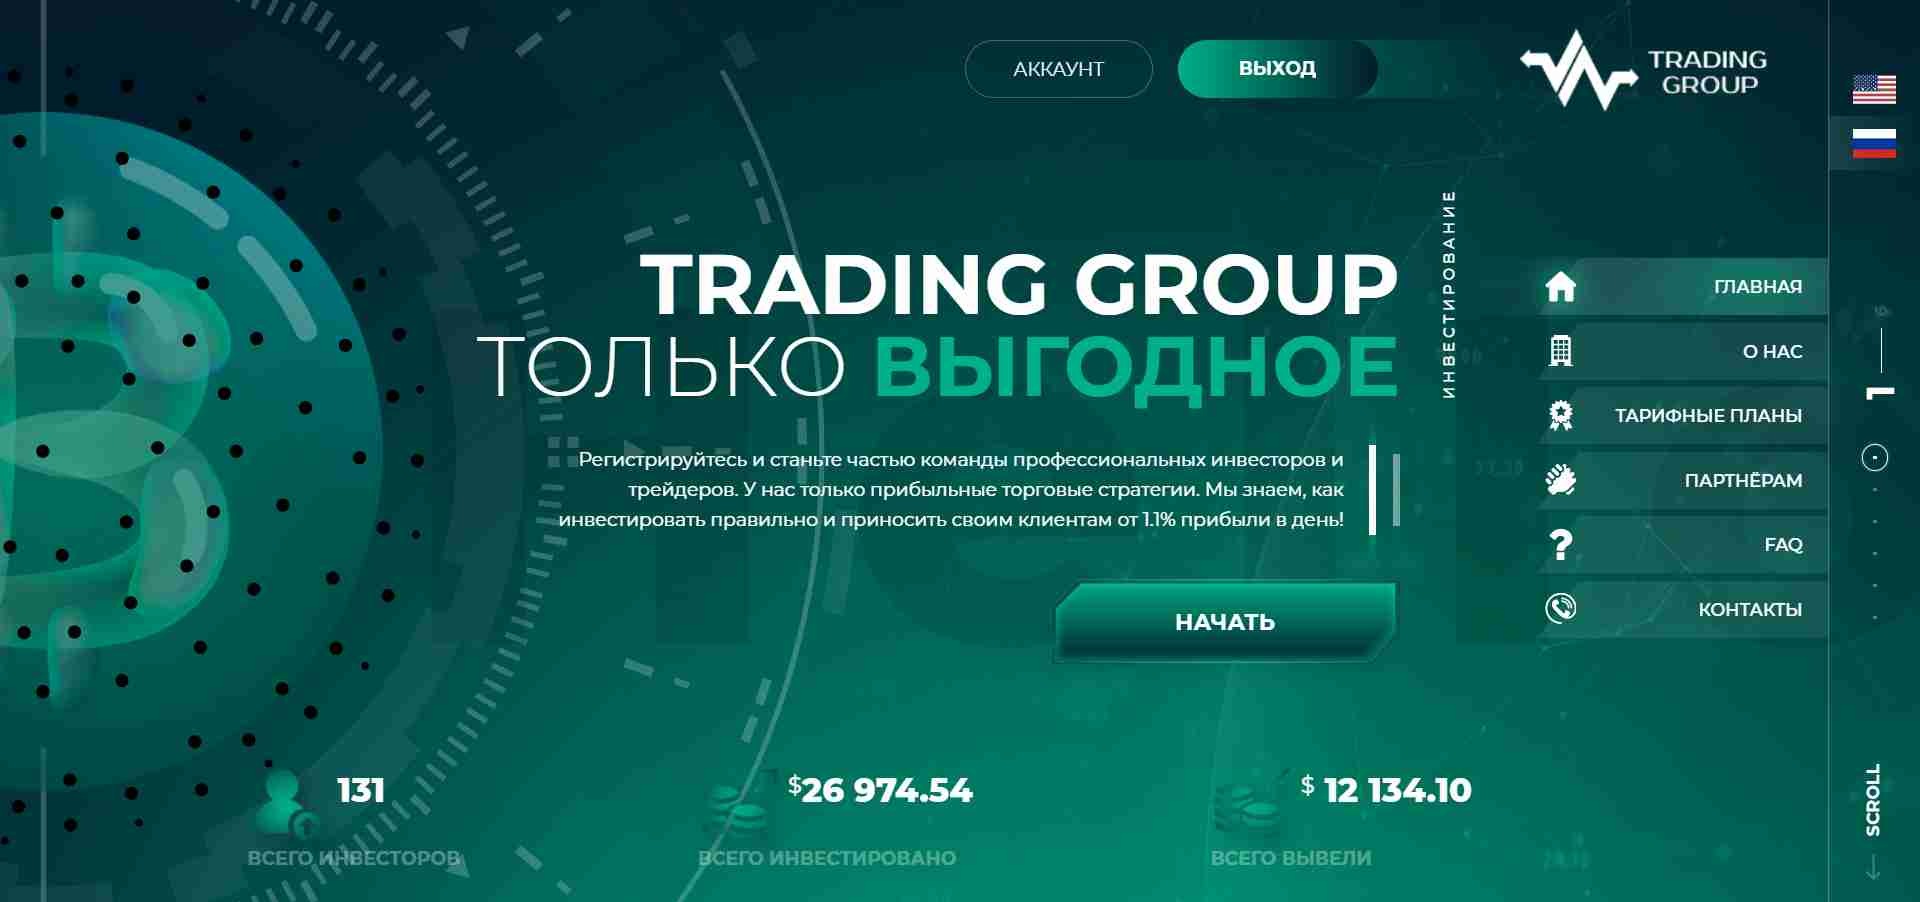 Trading Group